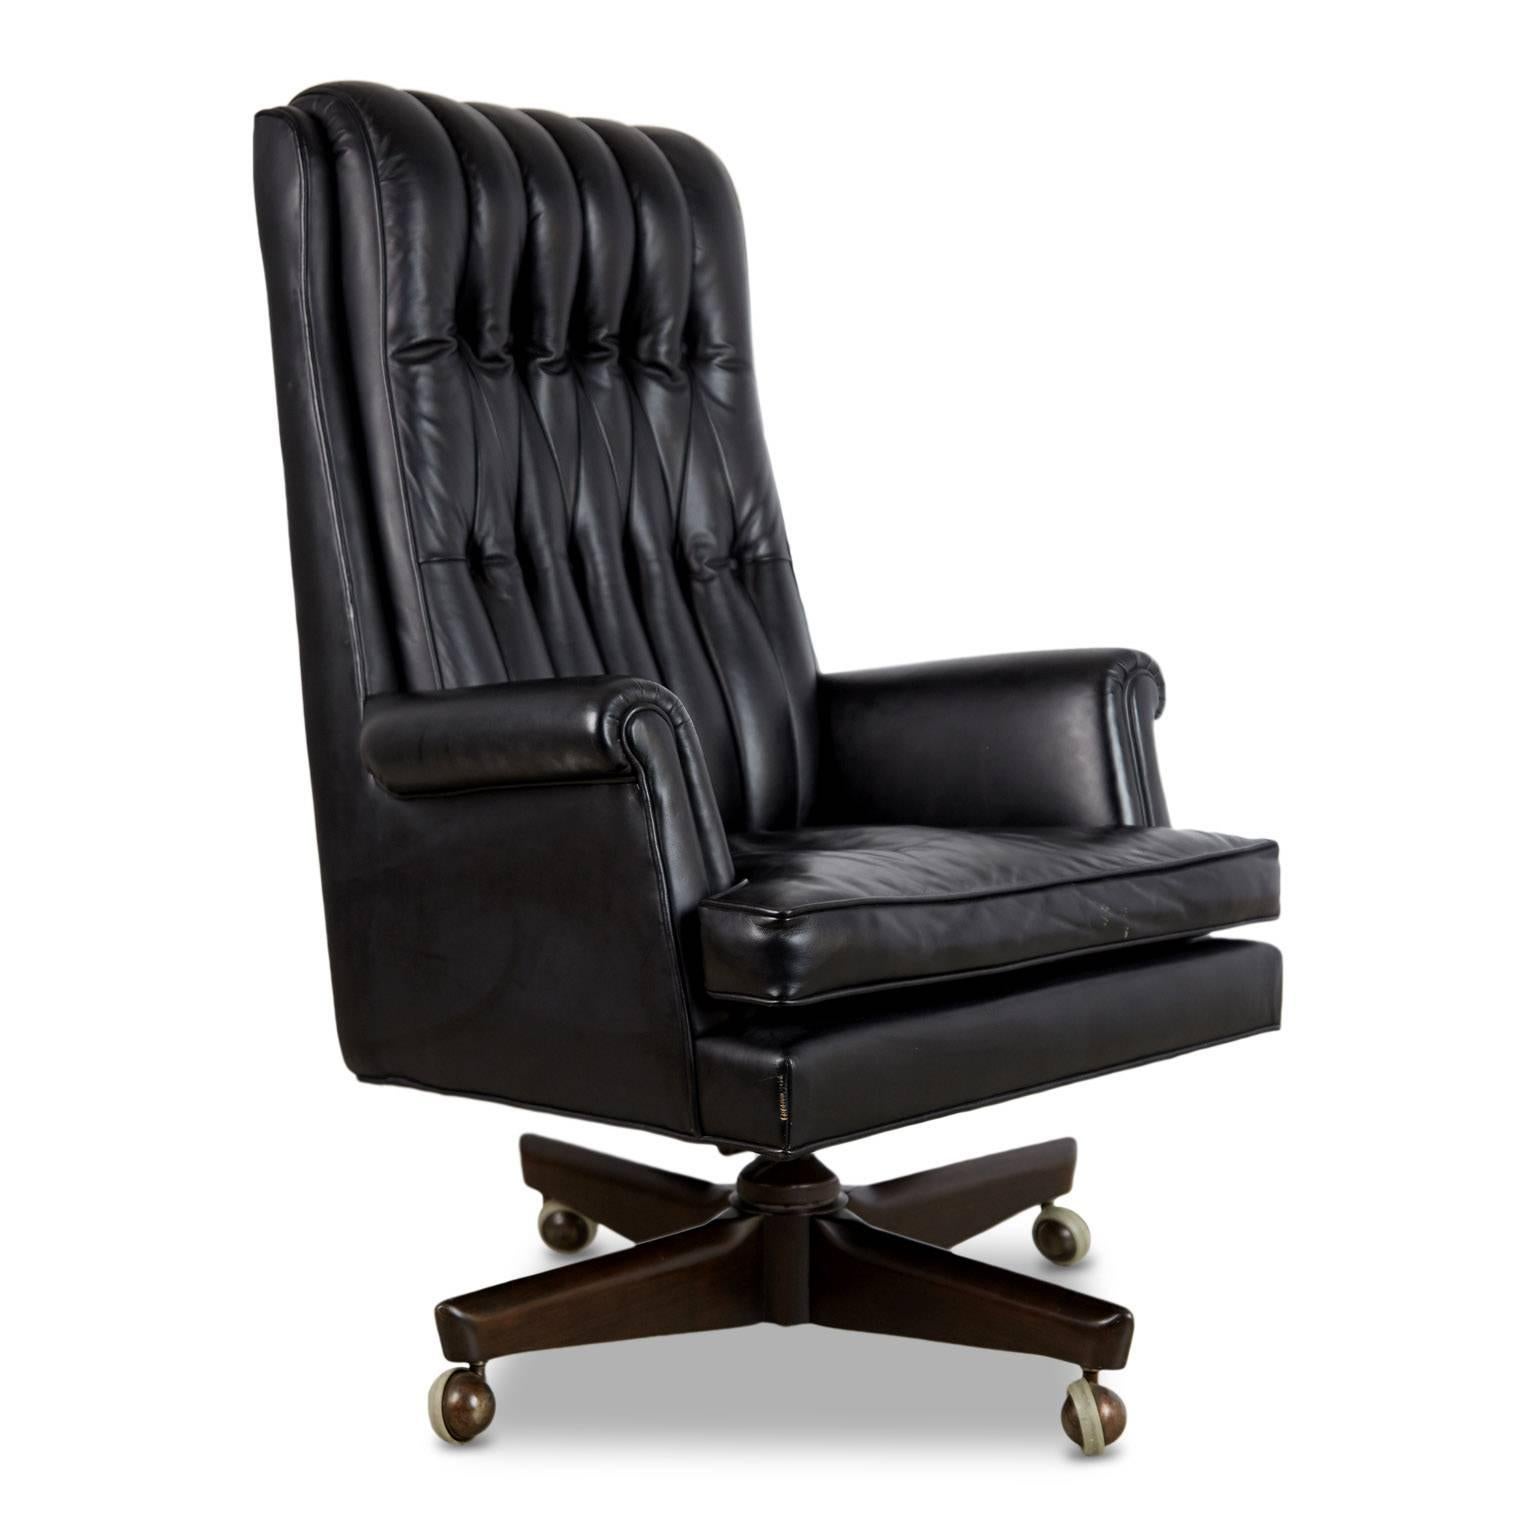 Grand scaled leather executive desk chair by Maurice Bailey for Monteverdi-Young. Renown for their application of the Italian modernist movement in their designs, Monteverdi-Young paired this approach with old-fashioned craftsmanship, both of which